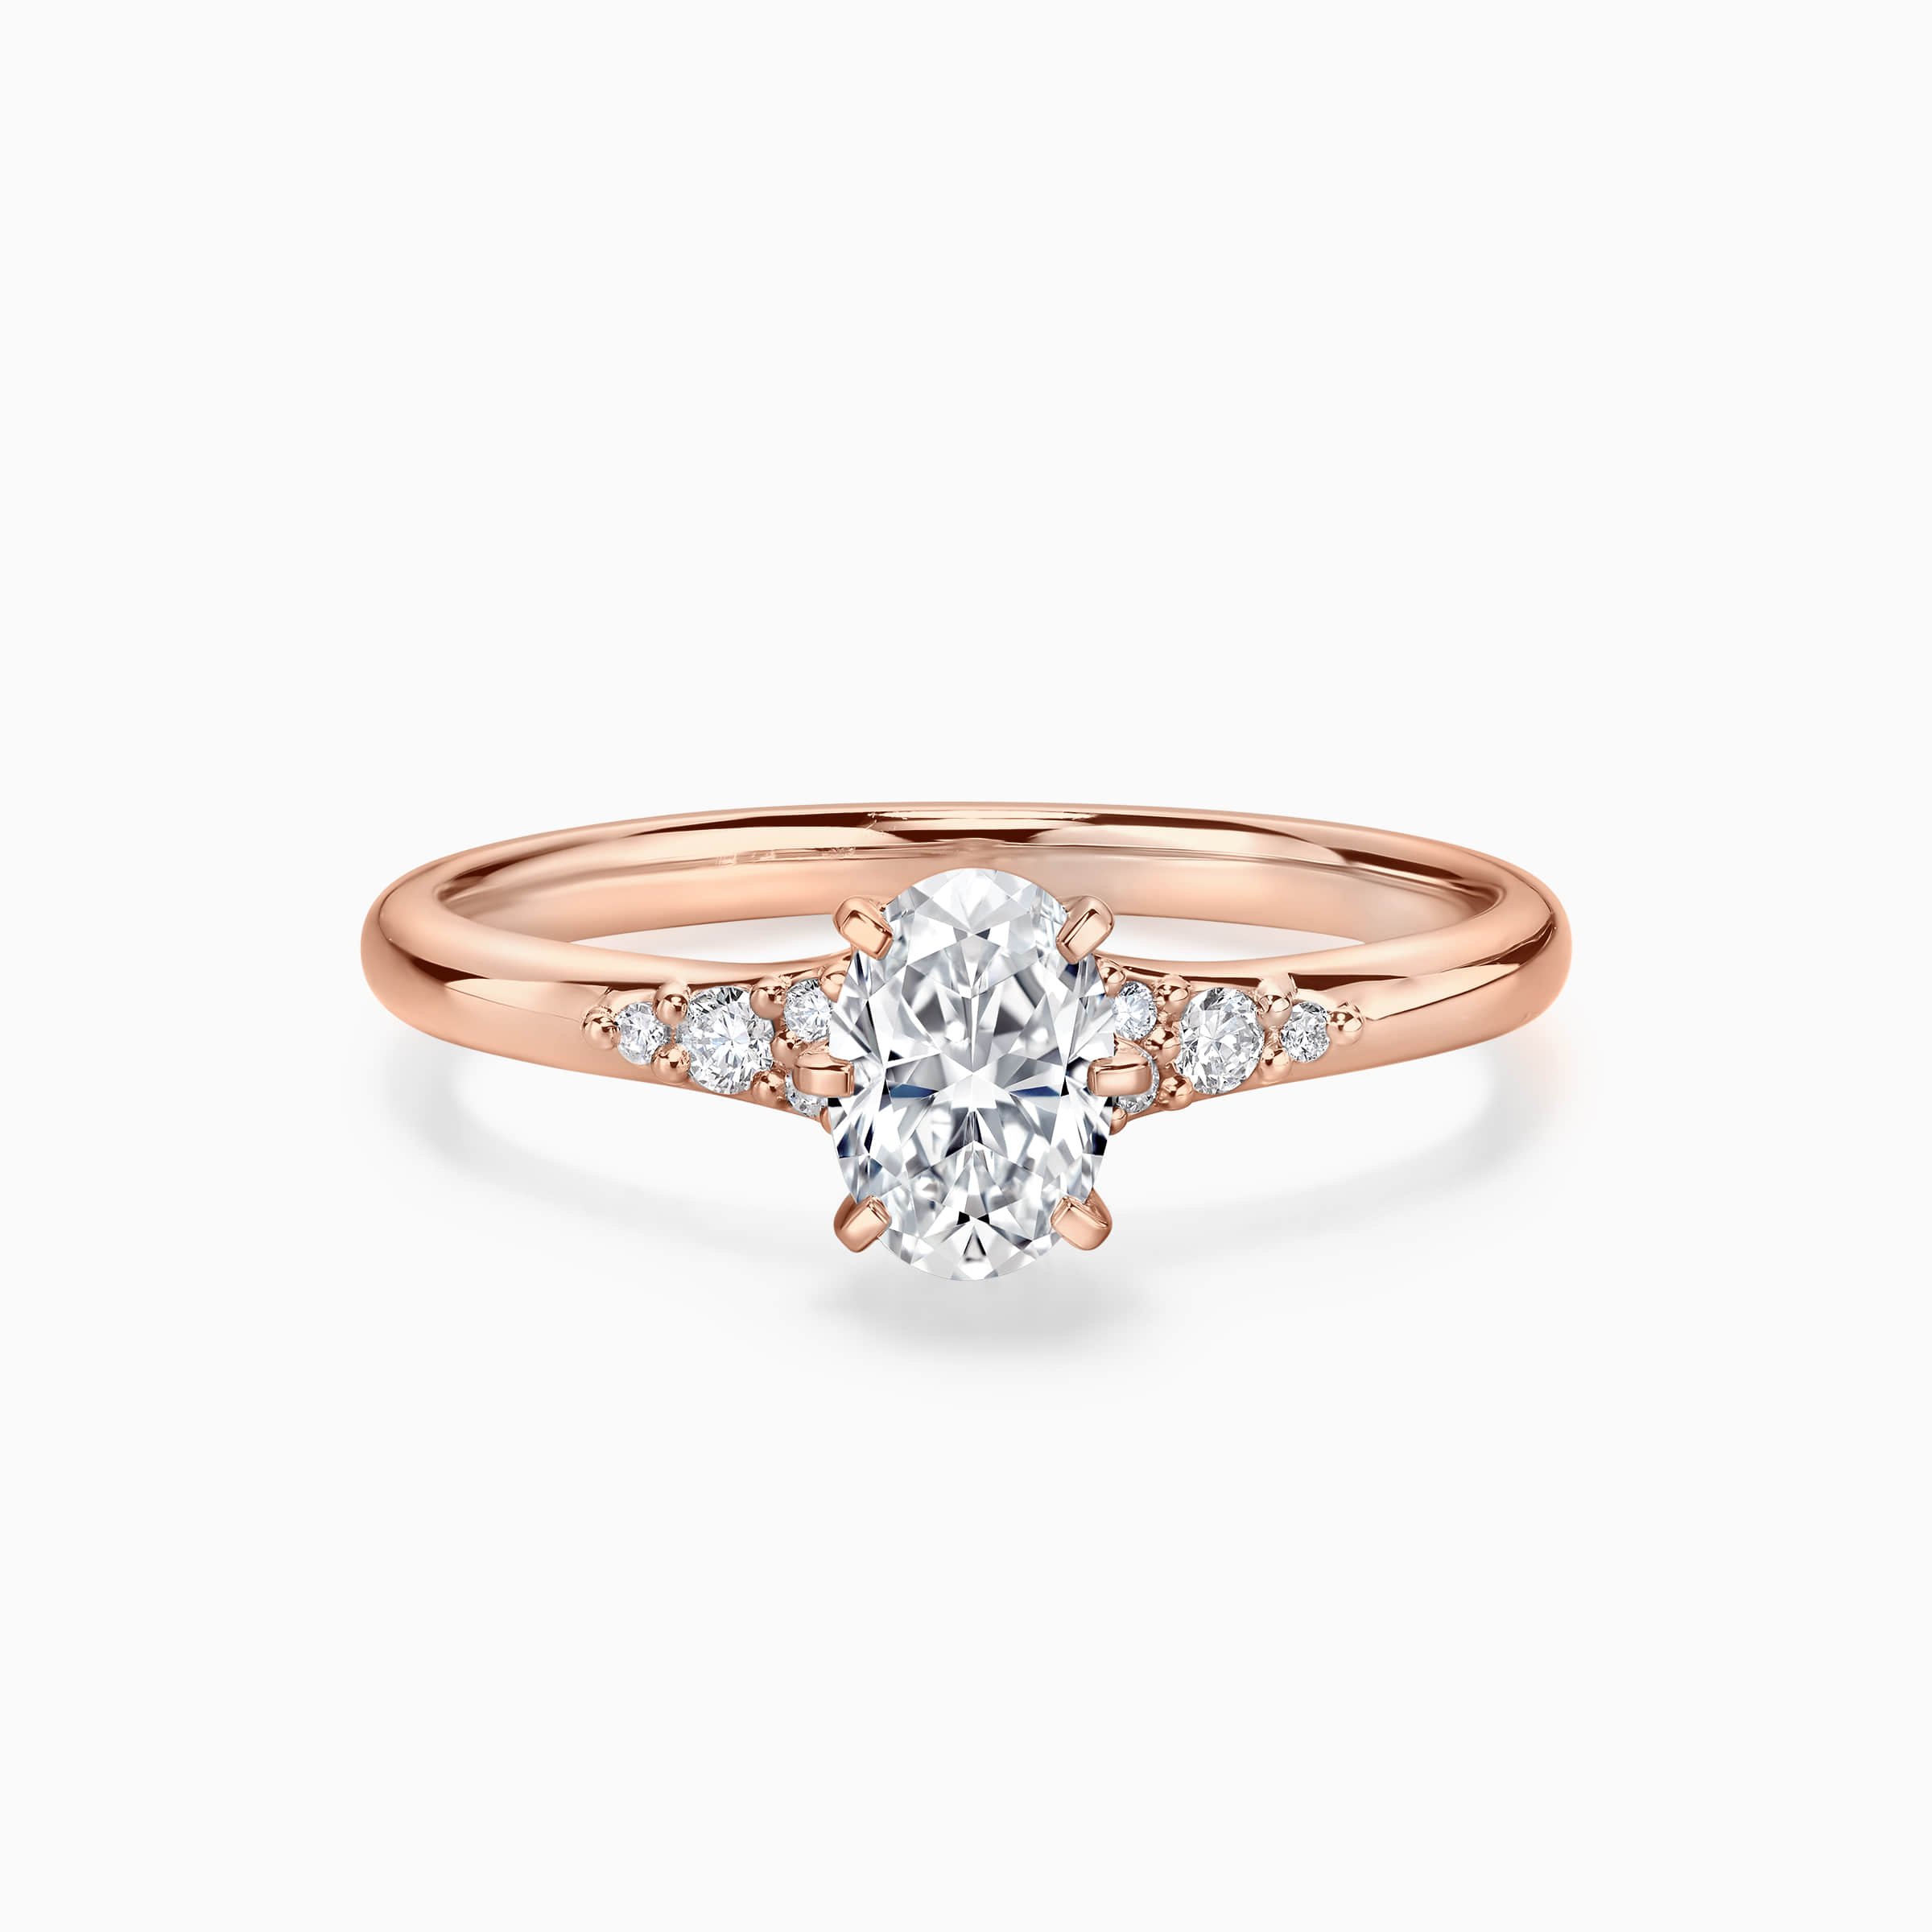 Darry Ring oval engagement ring in rose gold